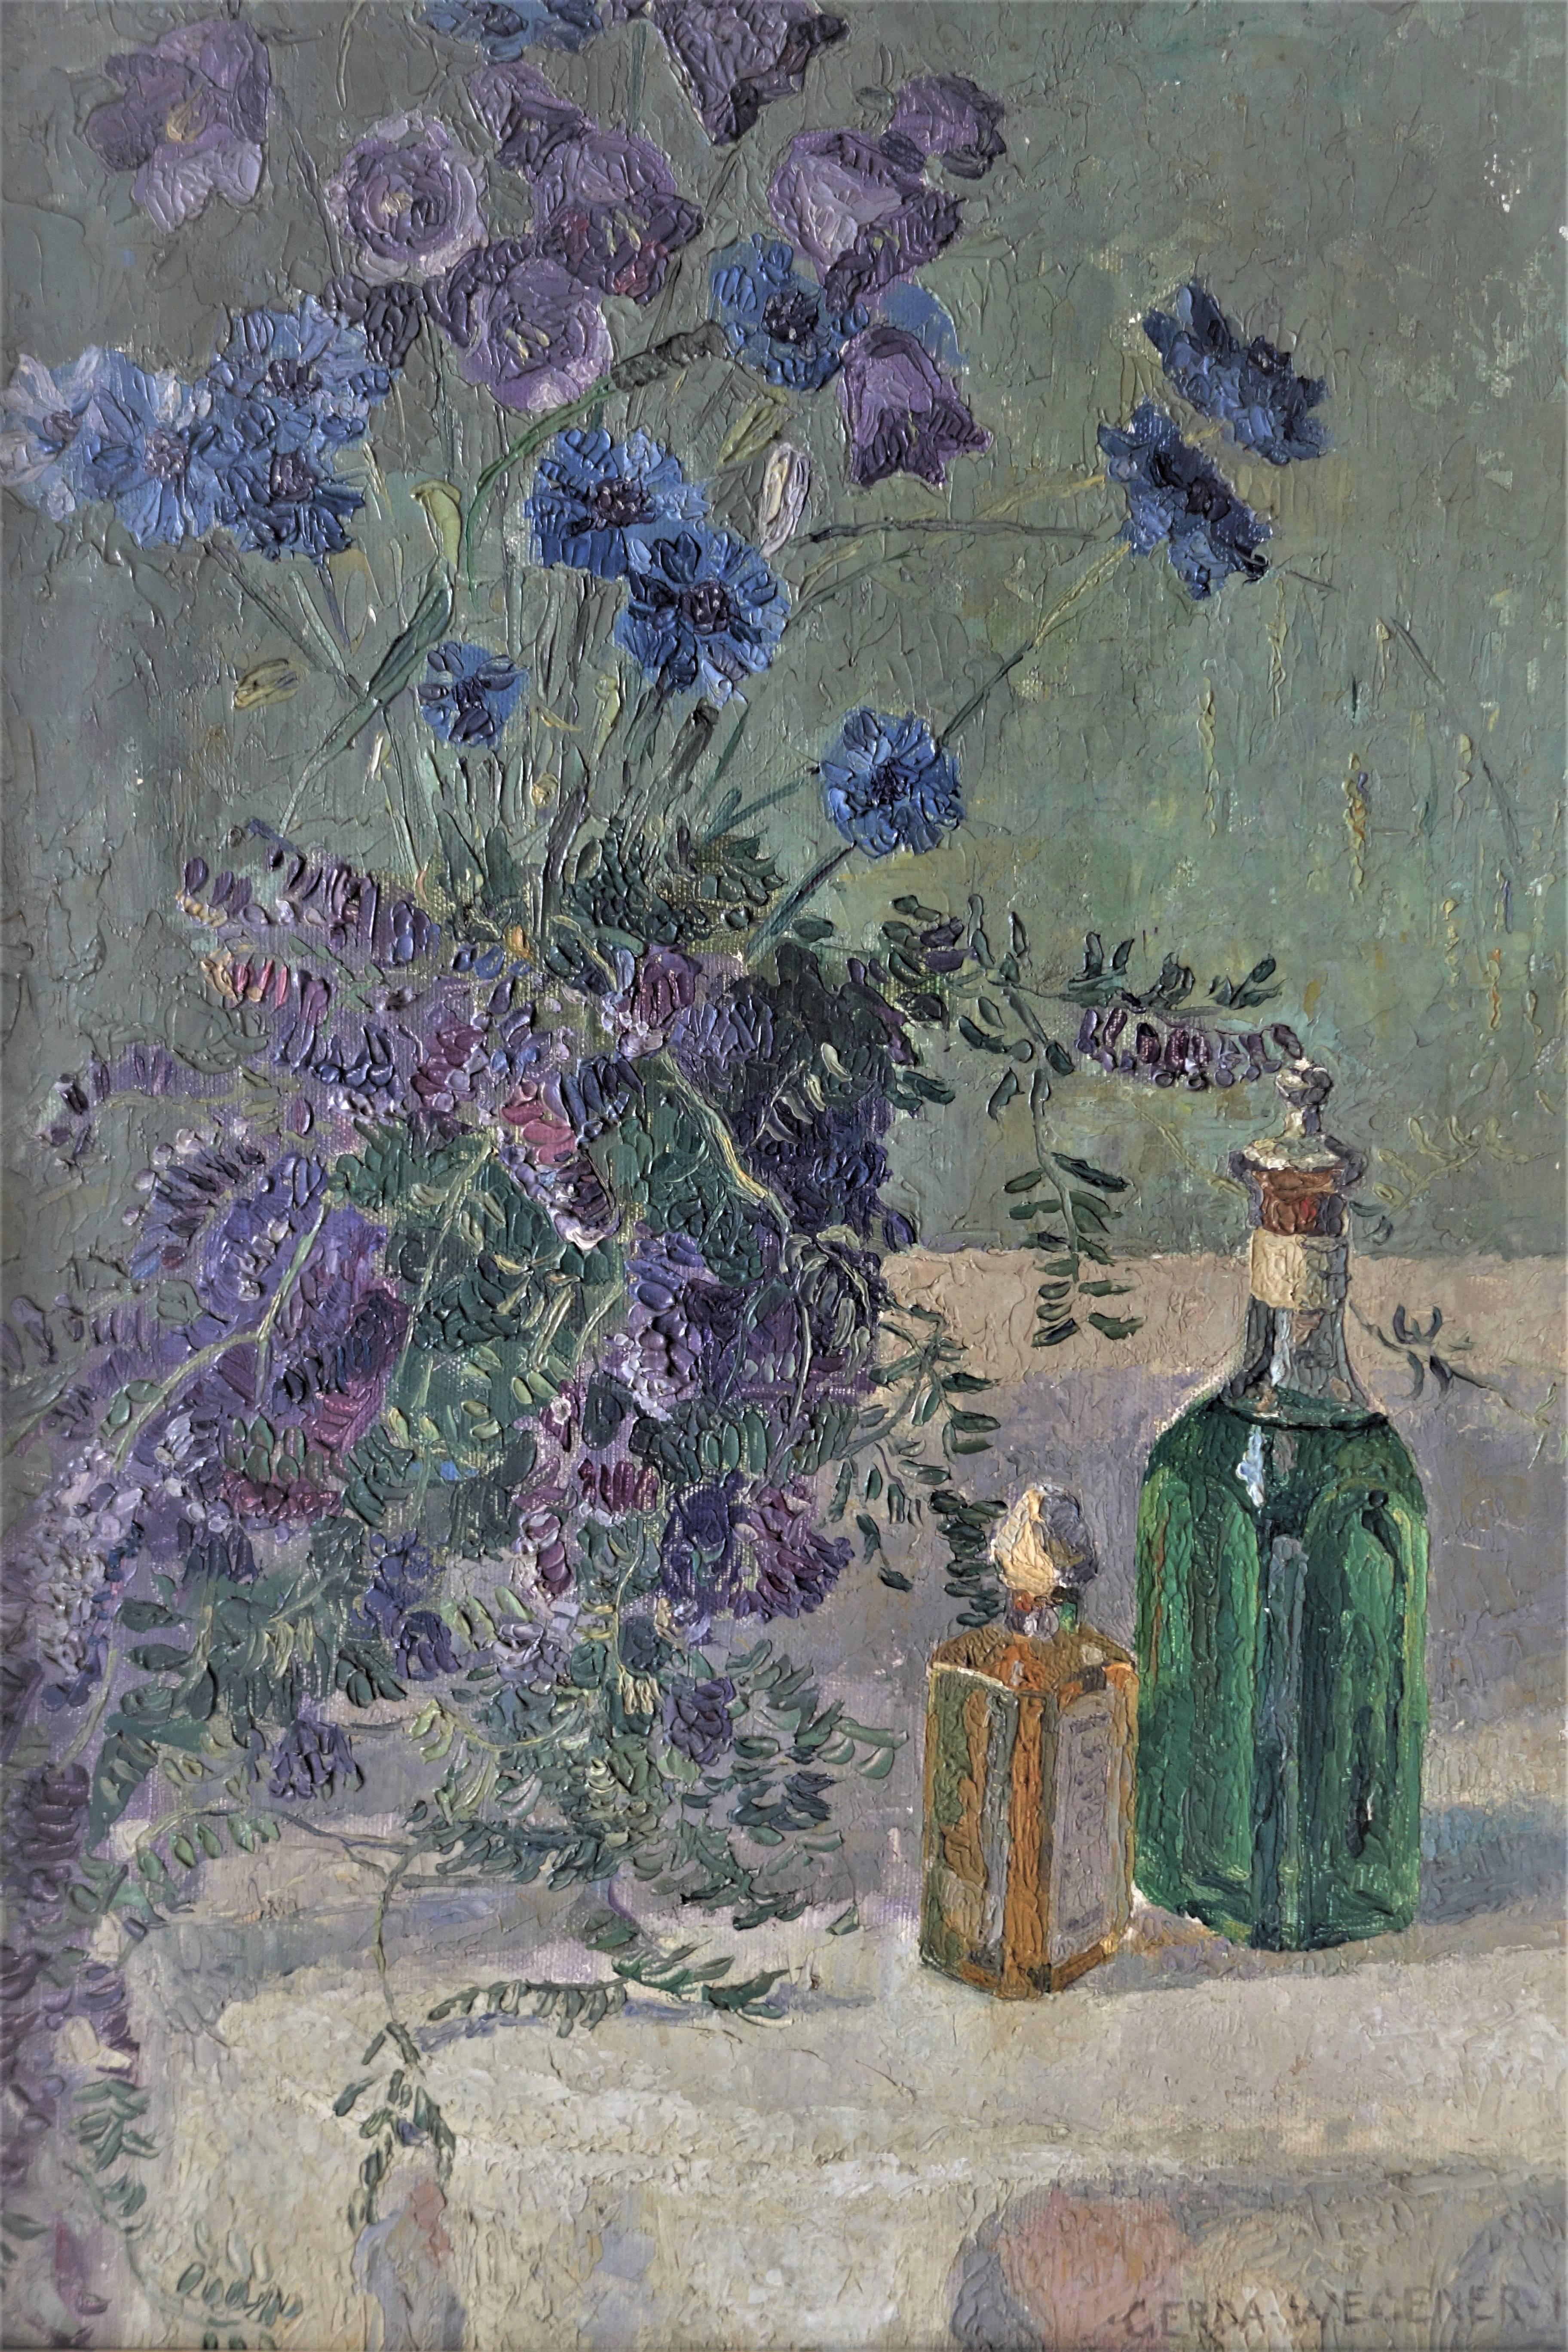 Oil on canvas of blue flowers and bottles on a table by the Danish artist Gerda Wegener (1885-1940).
Dimensions: (W x H) 53,5 x 71 cm, 21.1 x 28 in.

 